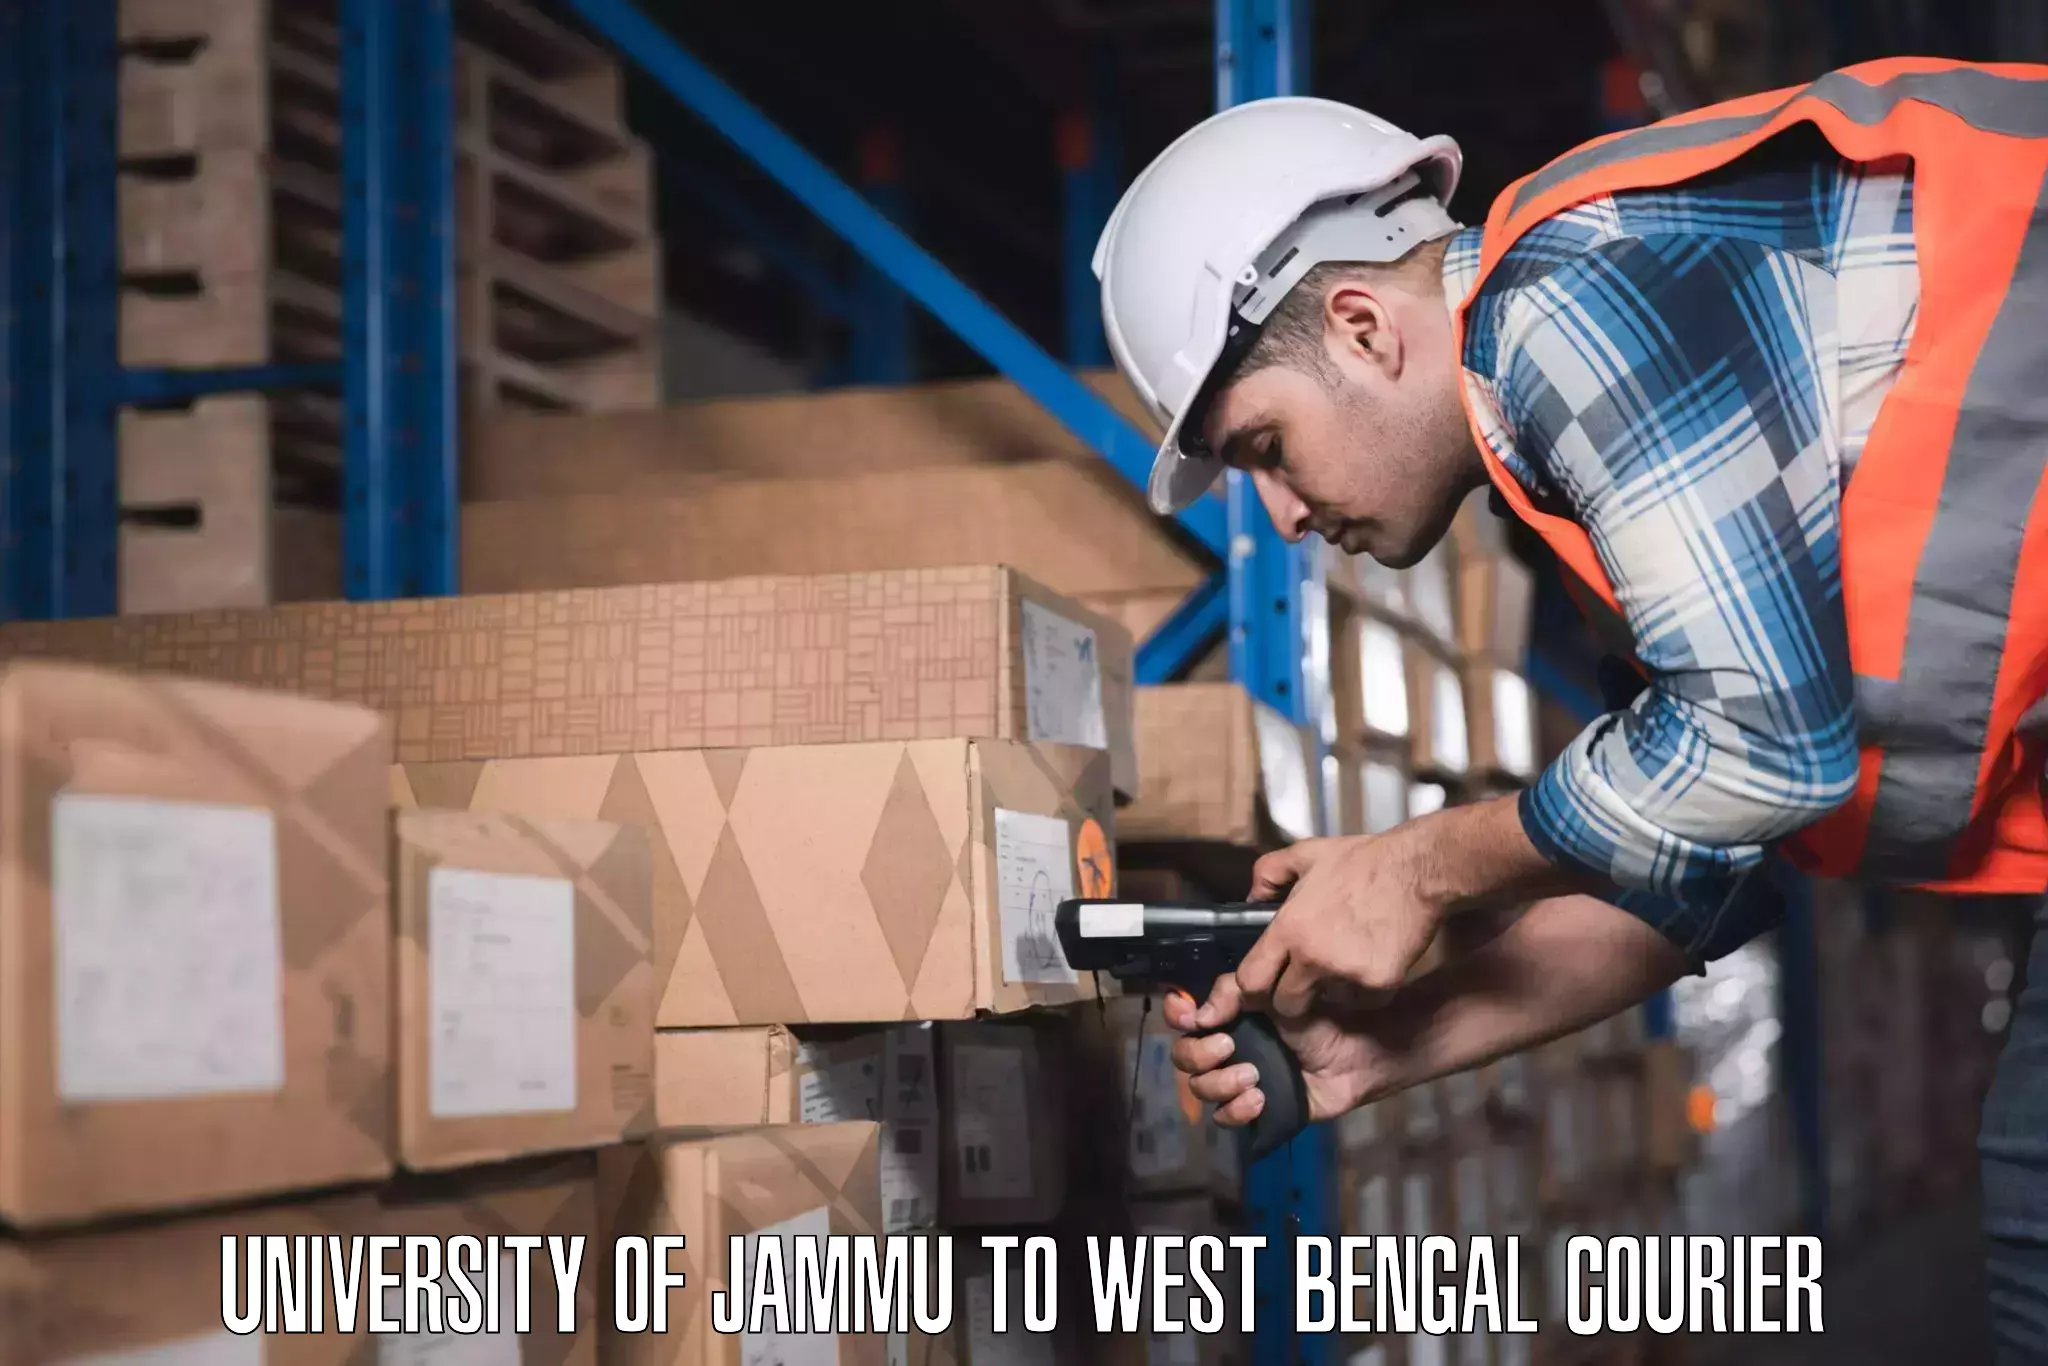 Same day luggage service in University of Jammu to West Bengal